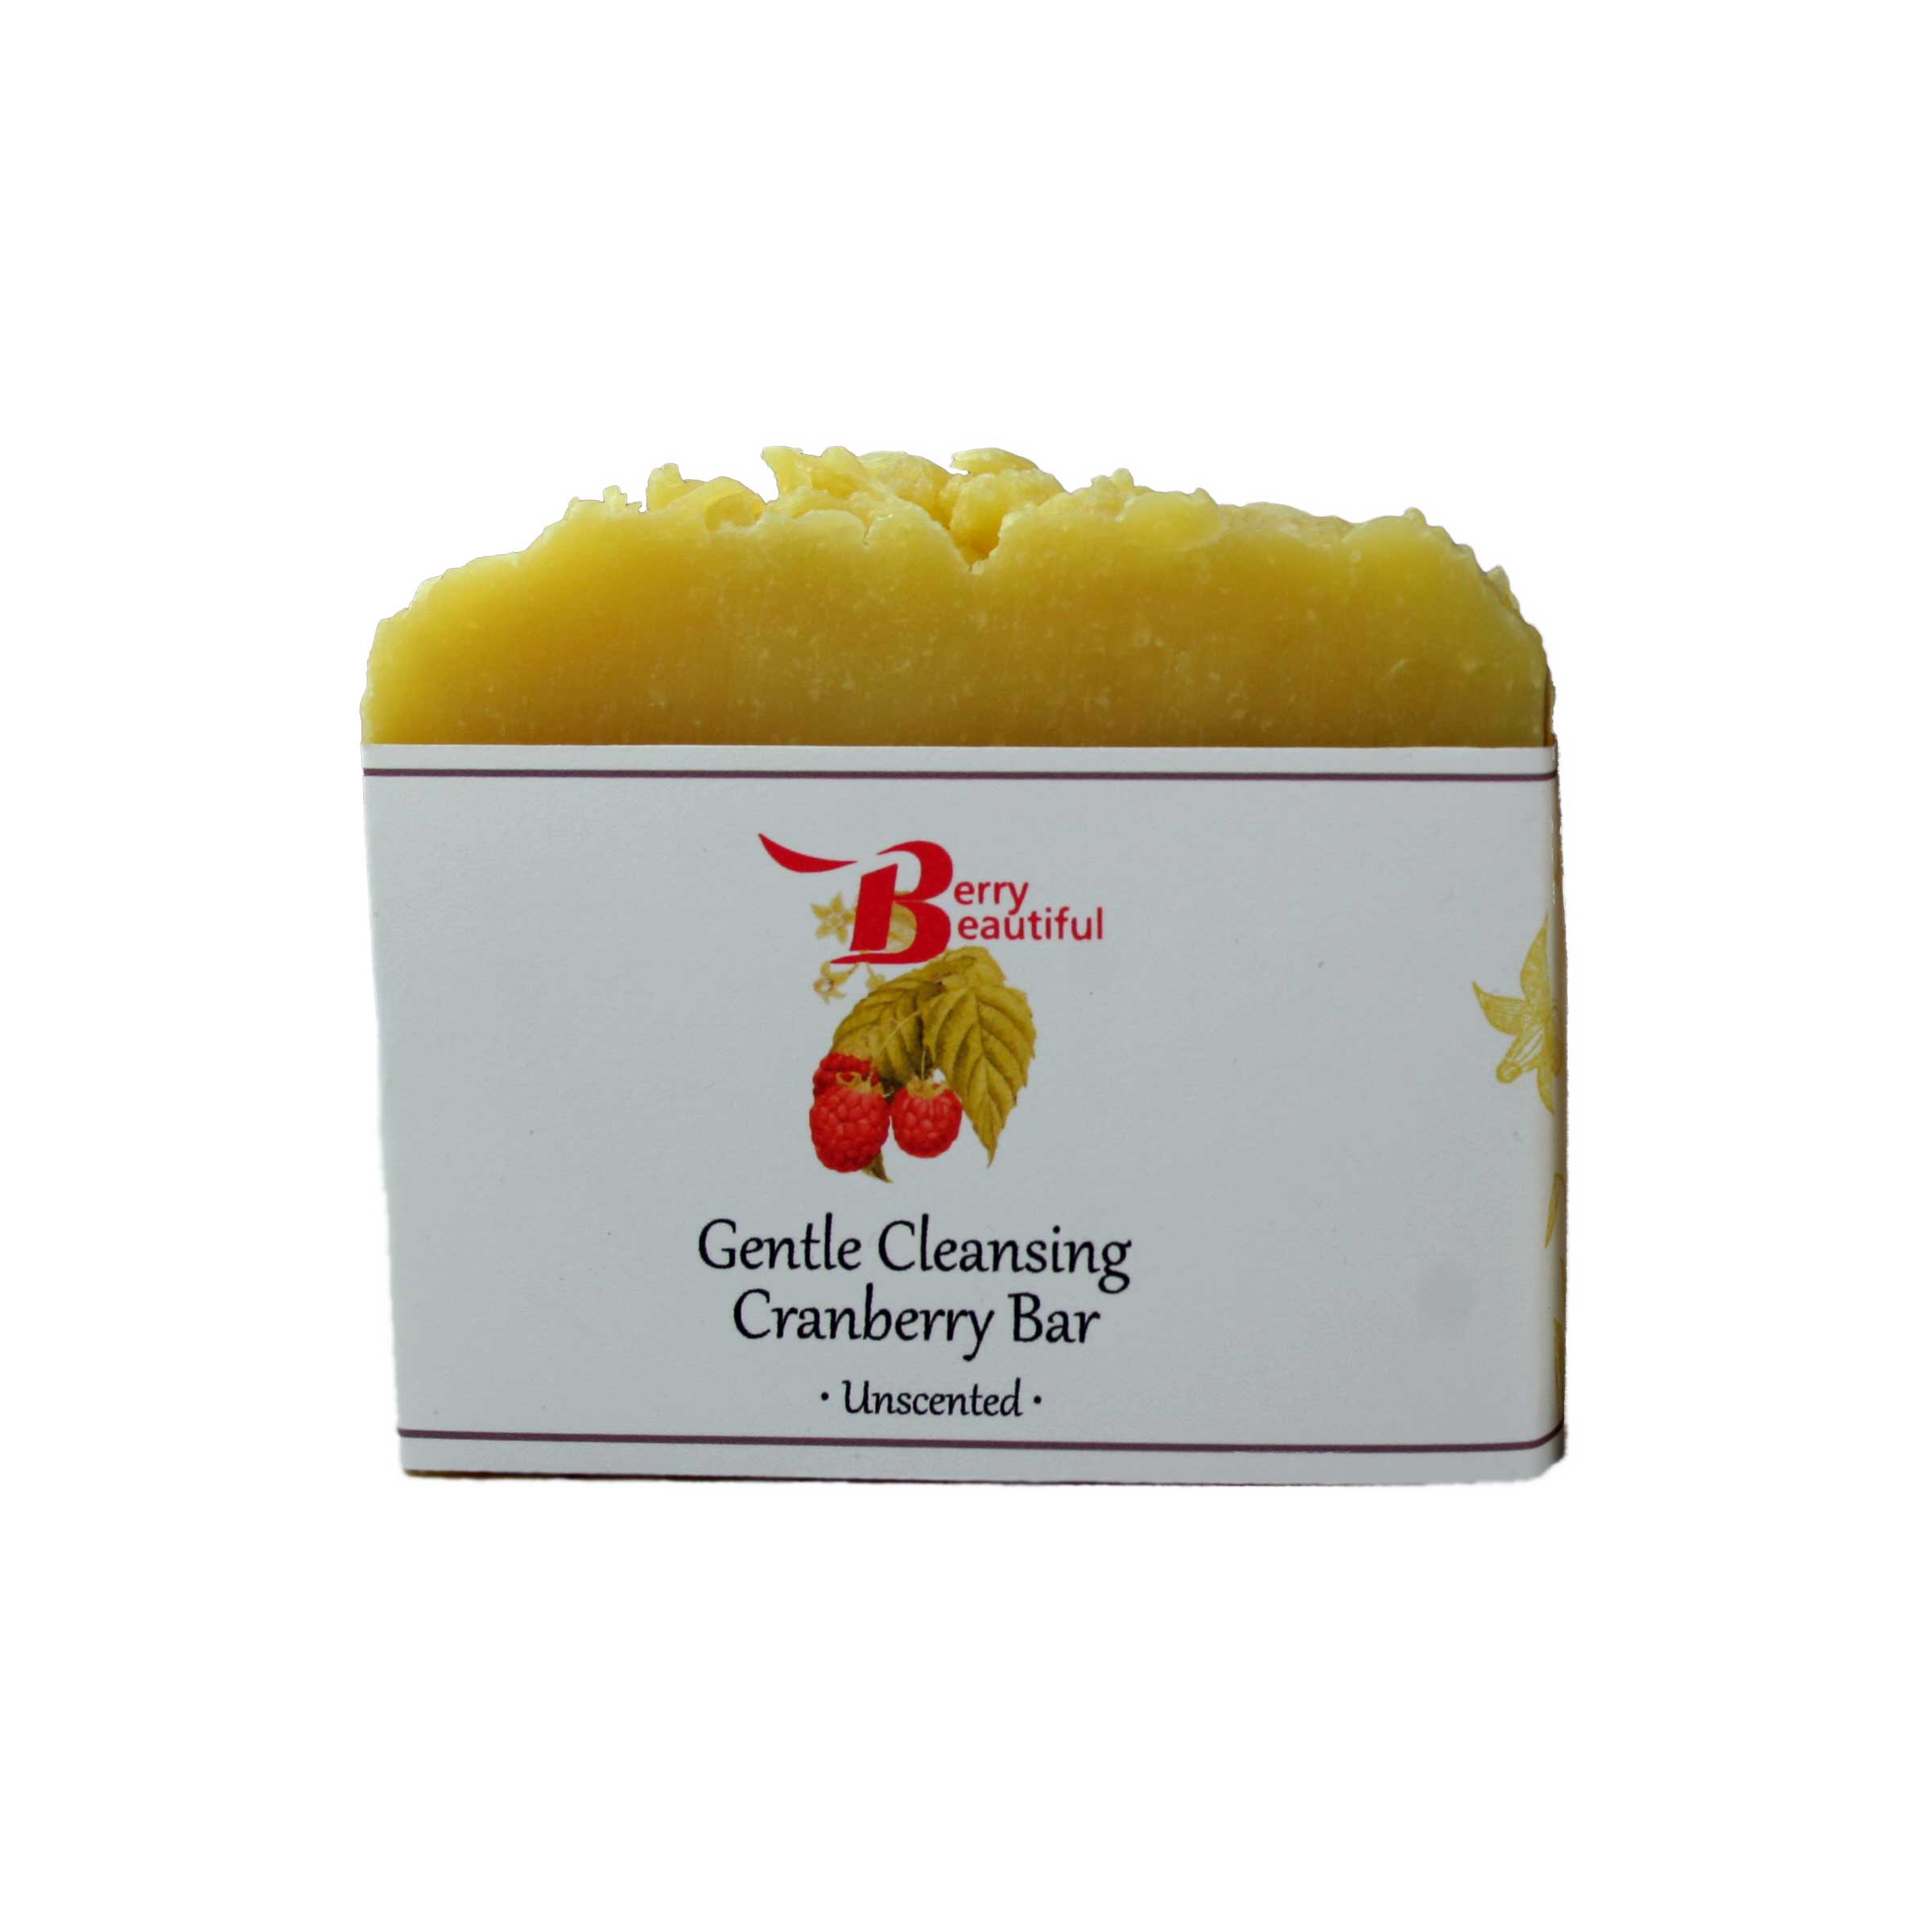 Gentle Cleansing Cranberry Bar